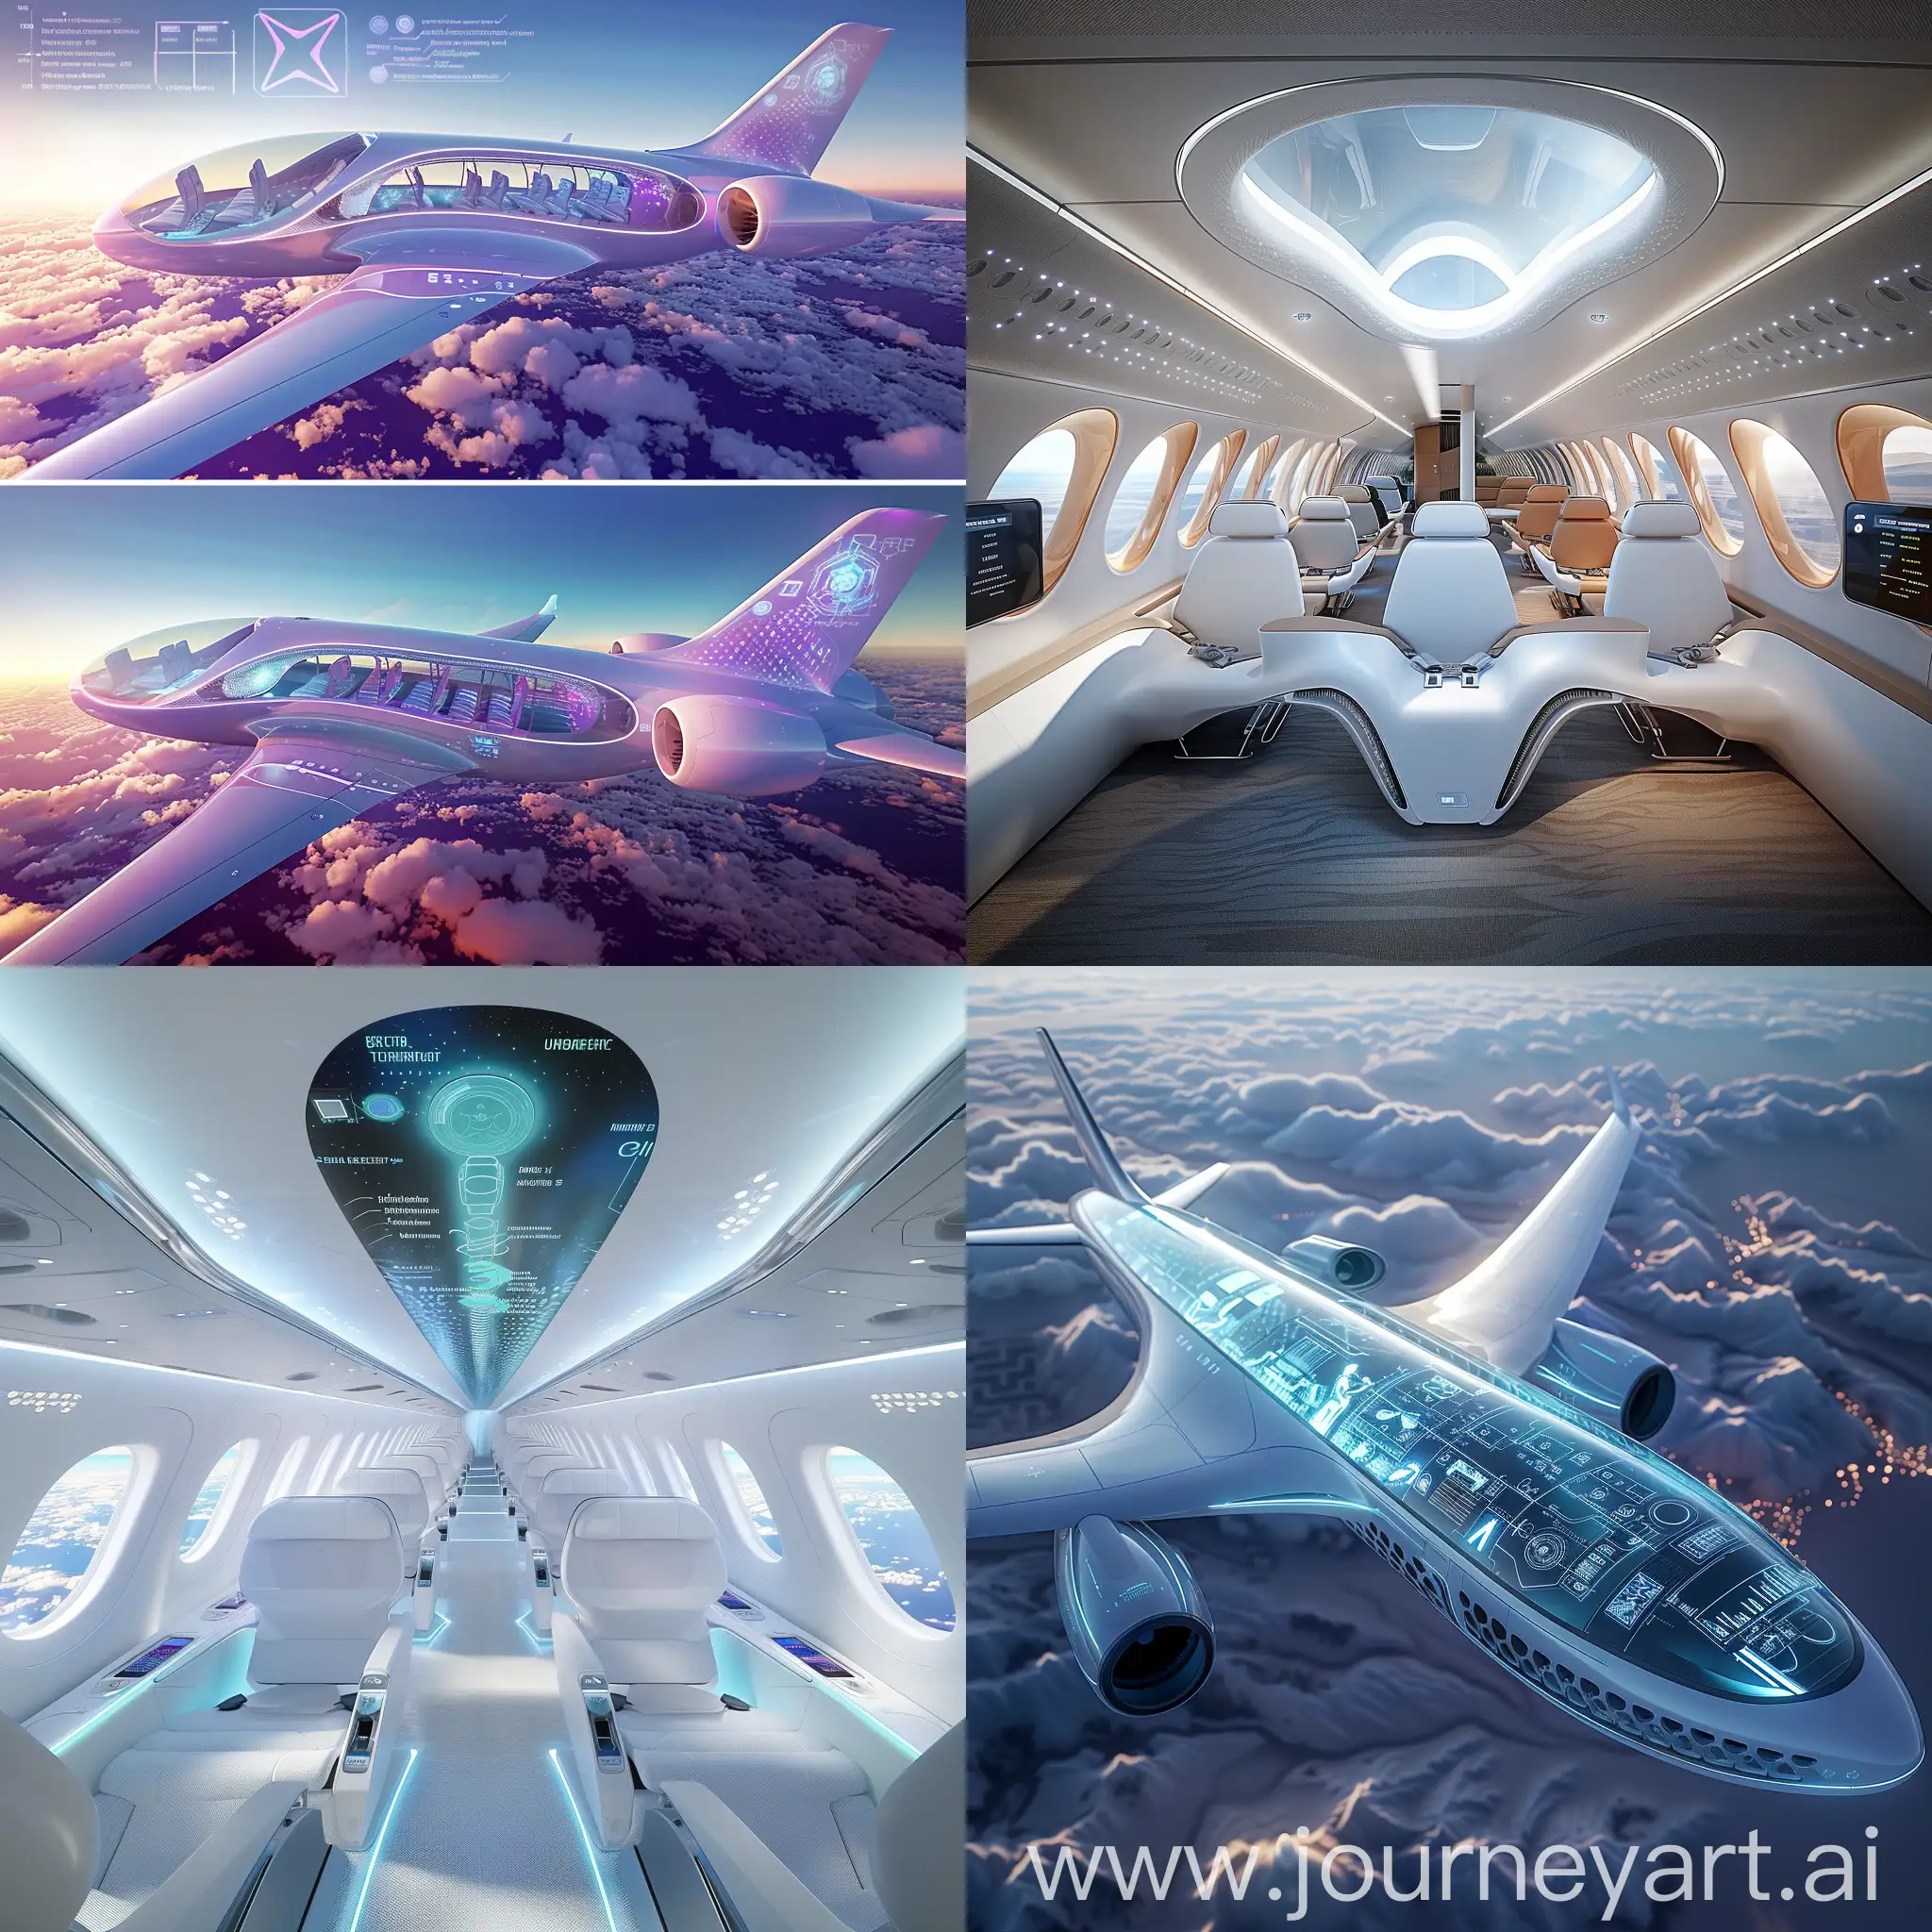 Futuristic passenger aircraft, information age of future, Adaptive Seating, Virtual Reality Entertainment, Smart Lighting Systems, Biometric Authentication, Air Quality Enhancement, Interactive Displays, Modular Cabin Layouts, Holographic Assistance, Zero-Gravity Seating, Aromatherapy System, Augmented Reality Windows, Data Visualization Panels, Artificial Intelligence Concierge, Blockchain-based Transactions, Data-driven Comfort Zones, Virtual Collaboration Spaces, Information Age Art Installations, Cybersecurity Pods, Internet of Things (IoT) Integration, Digital Wellness Platforms, Variable Geometry Wings, Biometric Entry Points, Adaptive Skin Technology, Embedded Sensors, Solar Panel Integration, Noise Reduction Features, Electrochromic Windows, Shape-memory Alloys, 360-Degree Cameras, Drone Integration Systems, Data Visualization Livery, Quantum Encryption Shields, 3D Printed Components, Augmented Reality Navigation Markers, Blockchain-based Maintenance Logs, Artificial Intelligence Wing Morphing, Distributed Energy Harvesting, Nanotechnology Coating, Quantum Radar Stealth Technology, Big Data-driven Weather Mapping, unreal engine 5 --stylize 1000